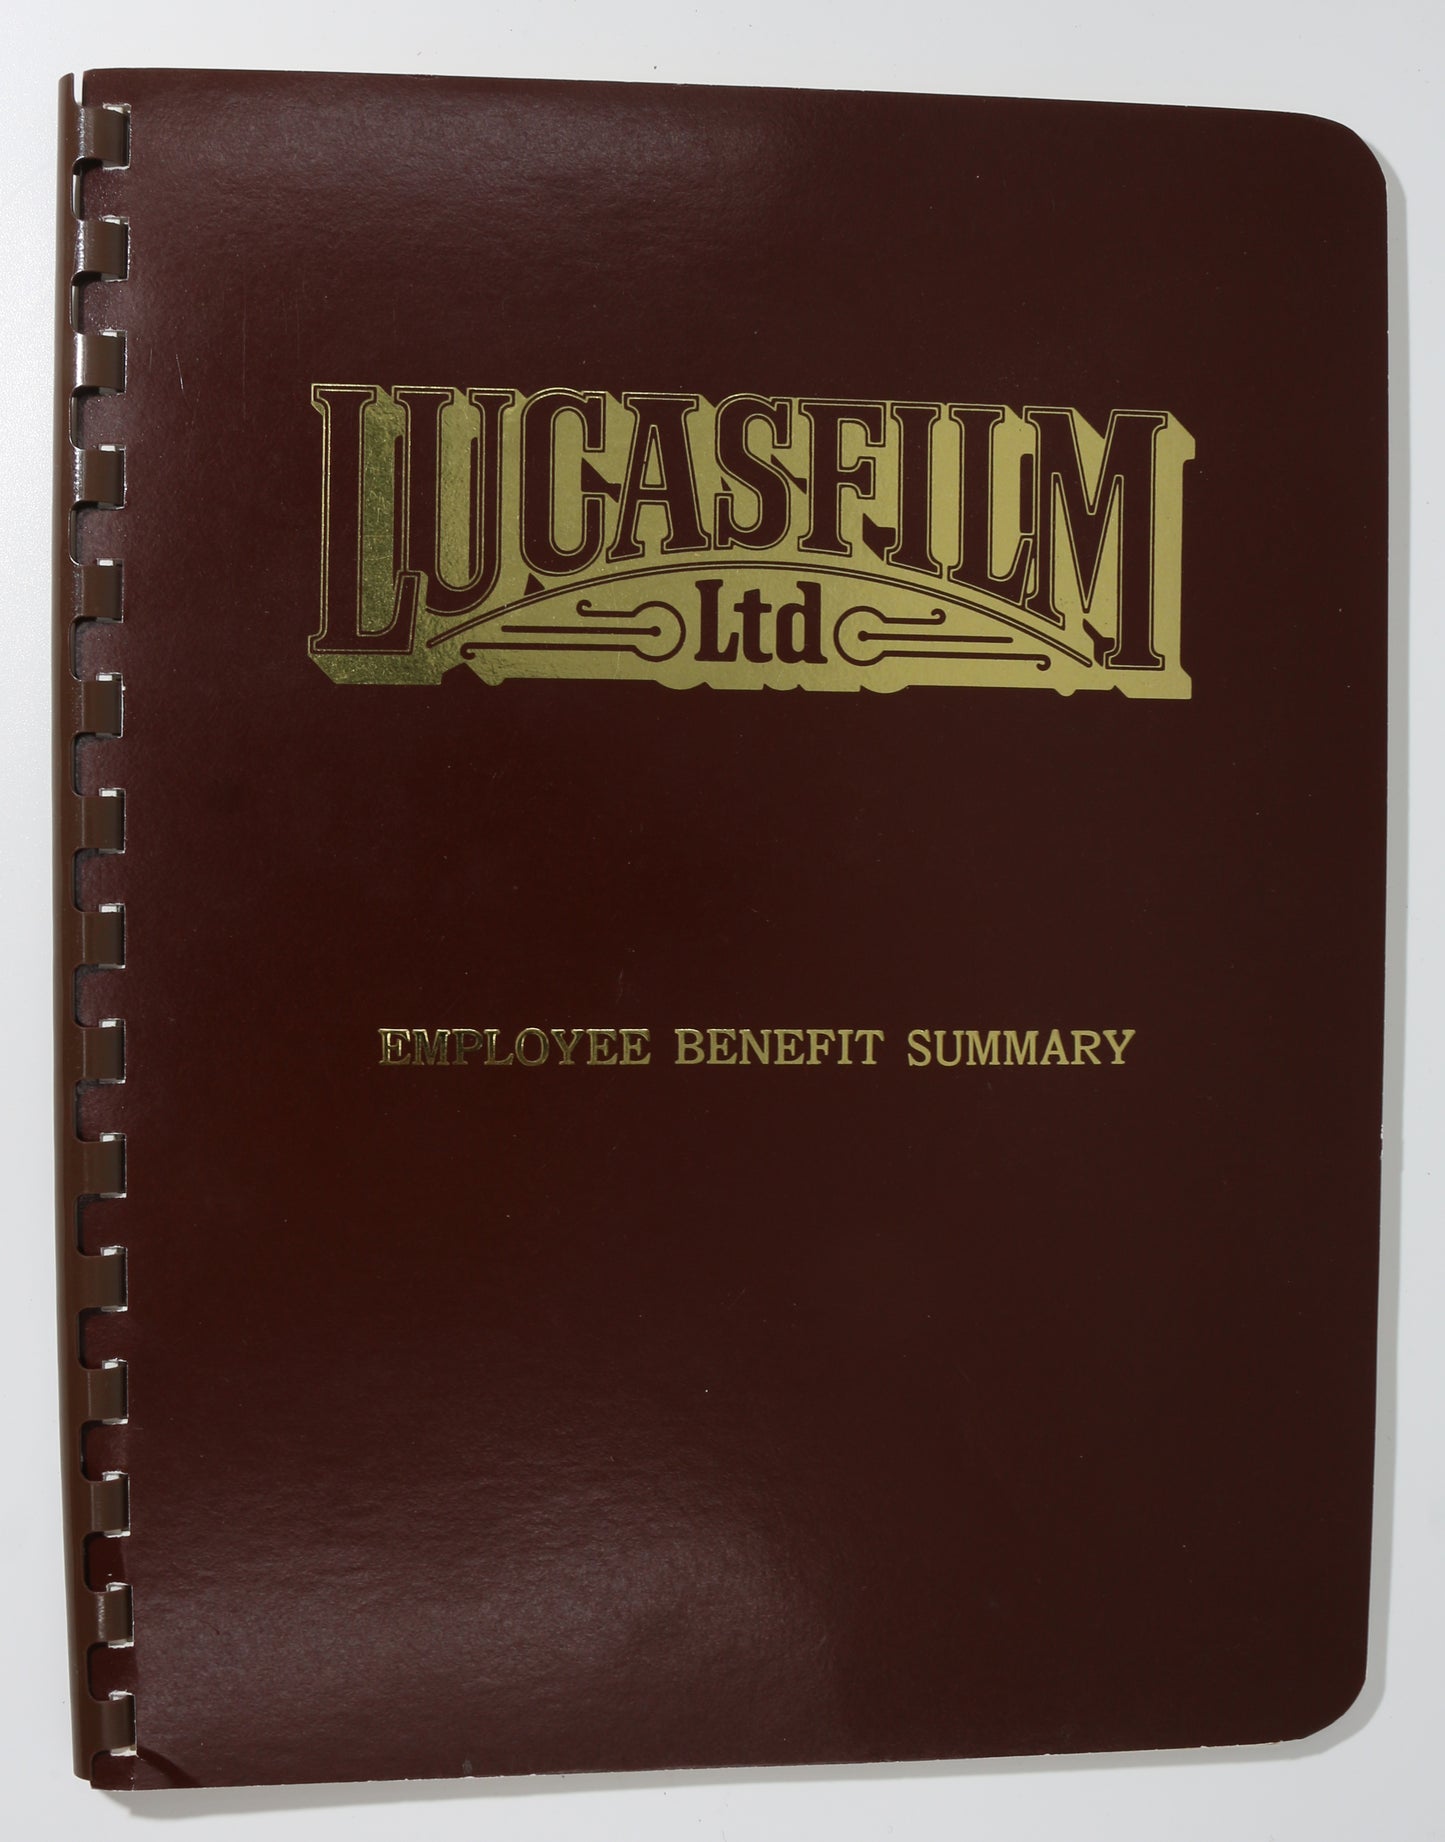 
                  
                    Wes Takahashi Industrial Light & Magic Collection - Lucasfilm Employee Benefit 20 Page Summary Report 1985
                  
                